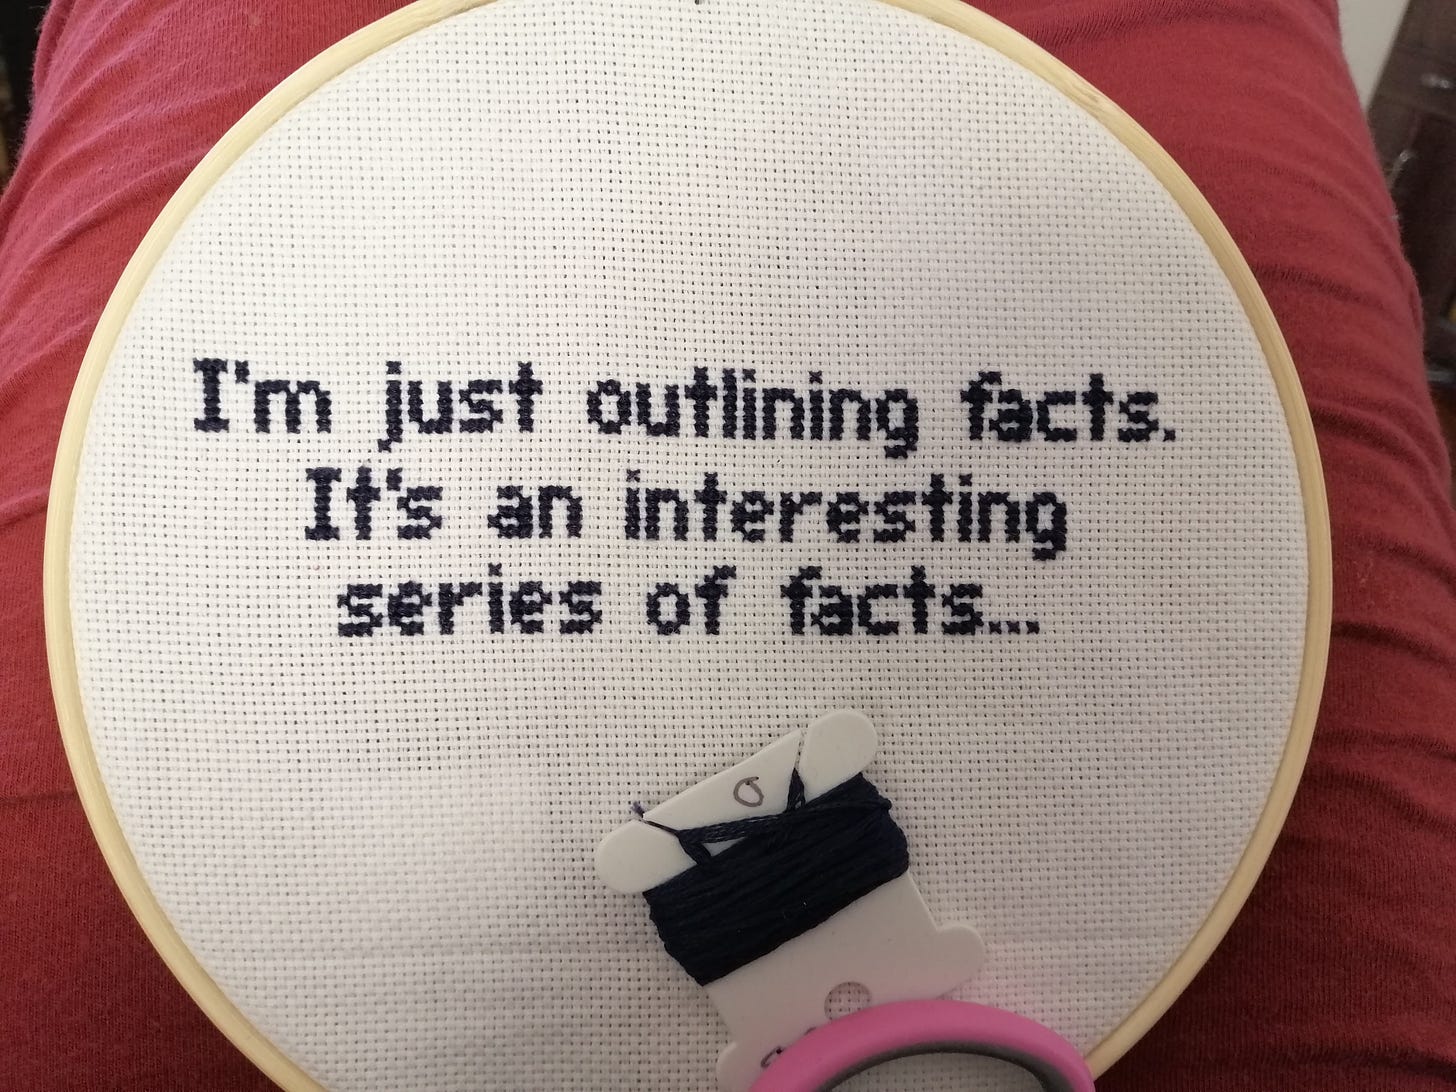 Completed cross stitch in a hoop. Text reads "I'm just outlining facts. It's an interesting series of facts..."